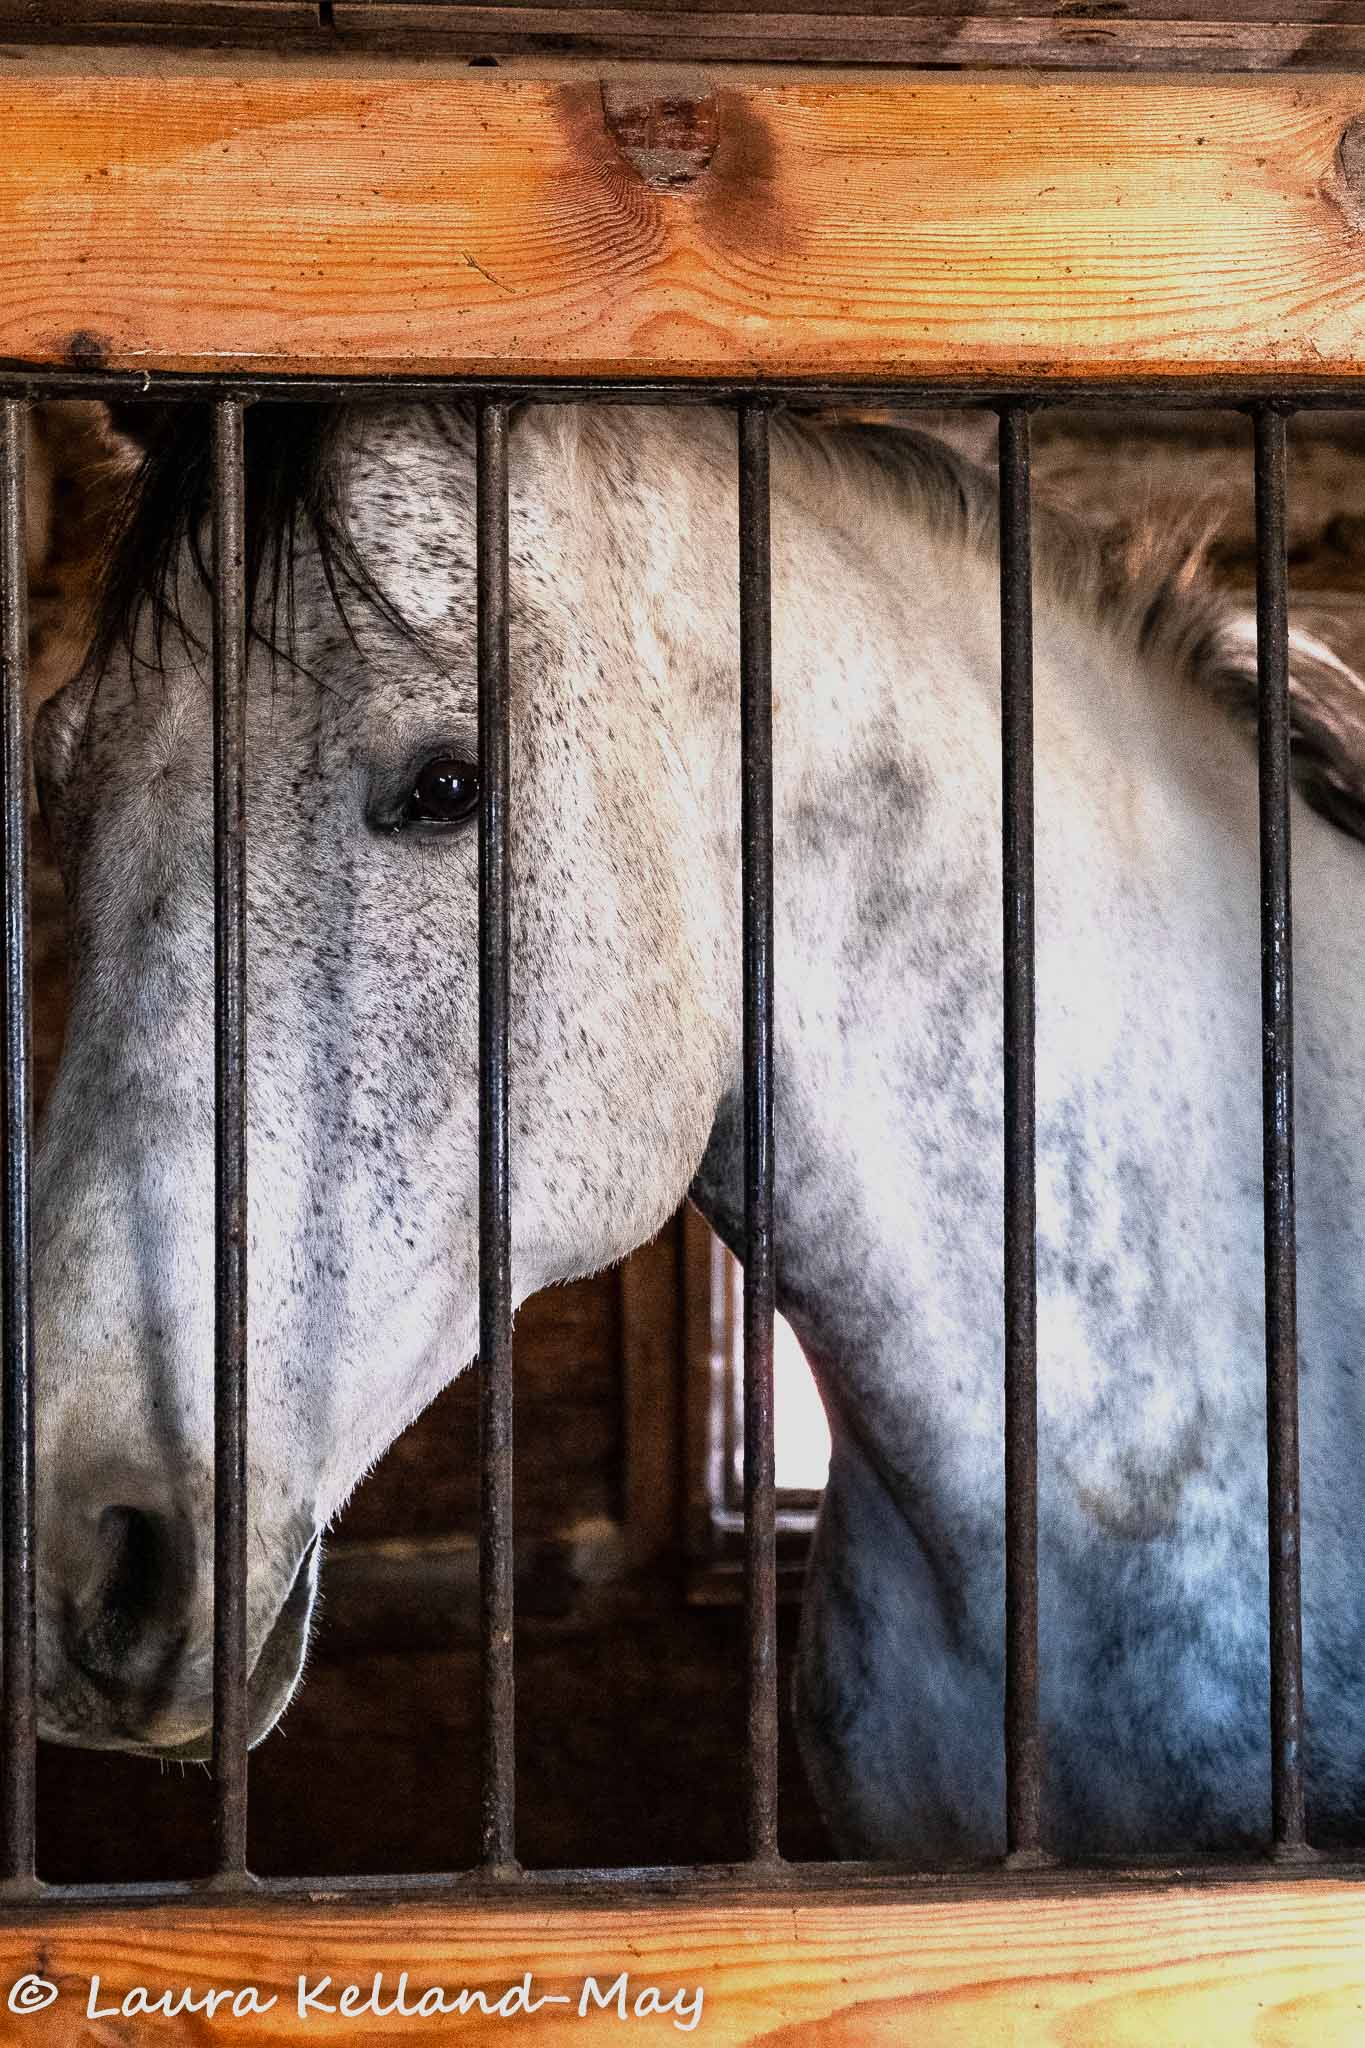 Horse's face shown behind the bars of a stable door.